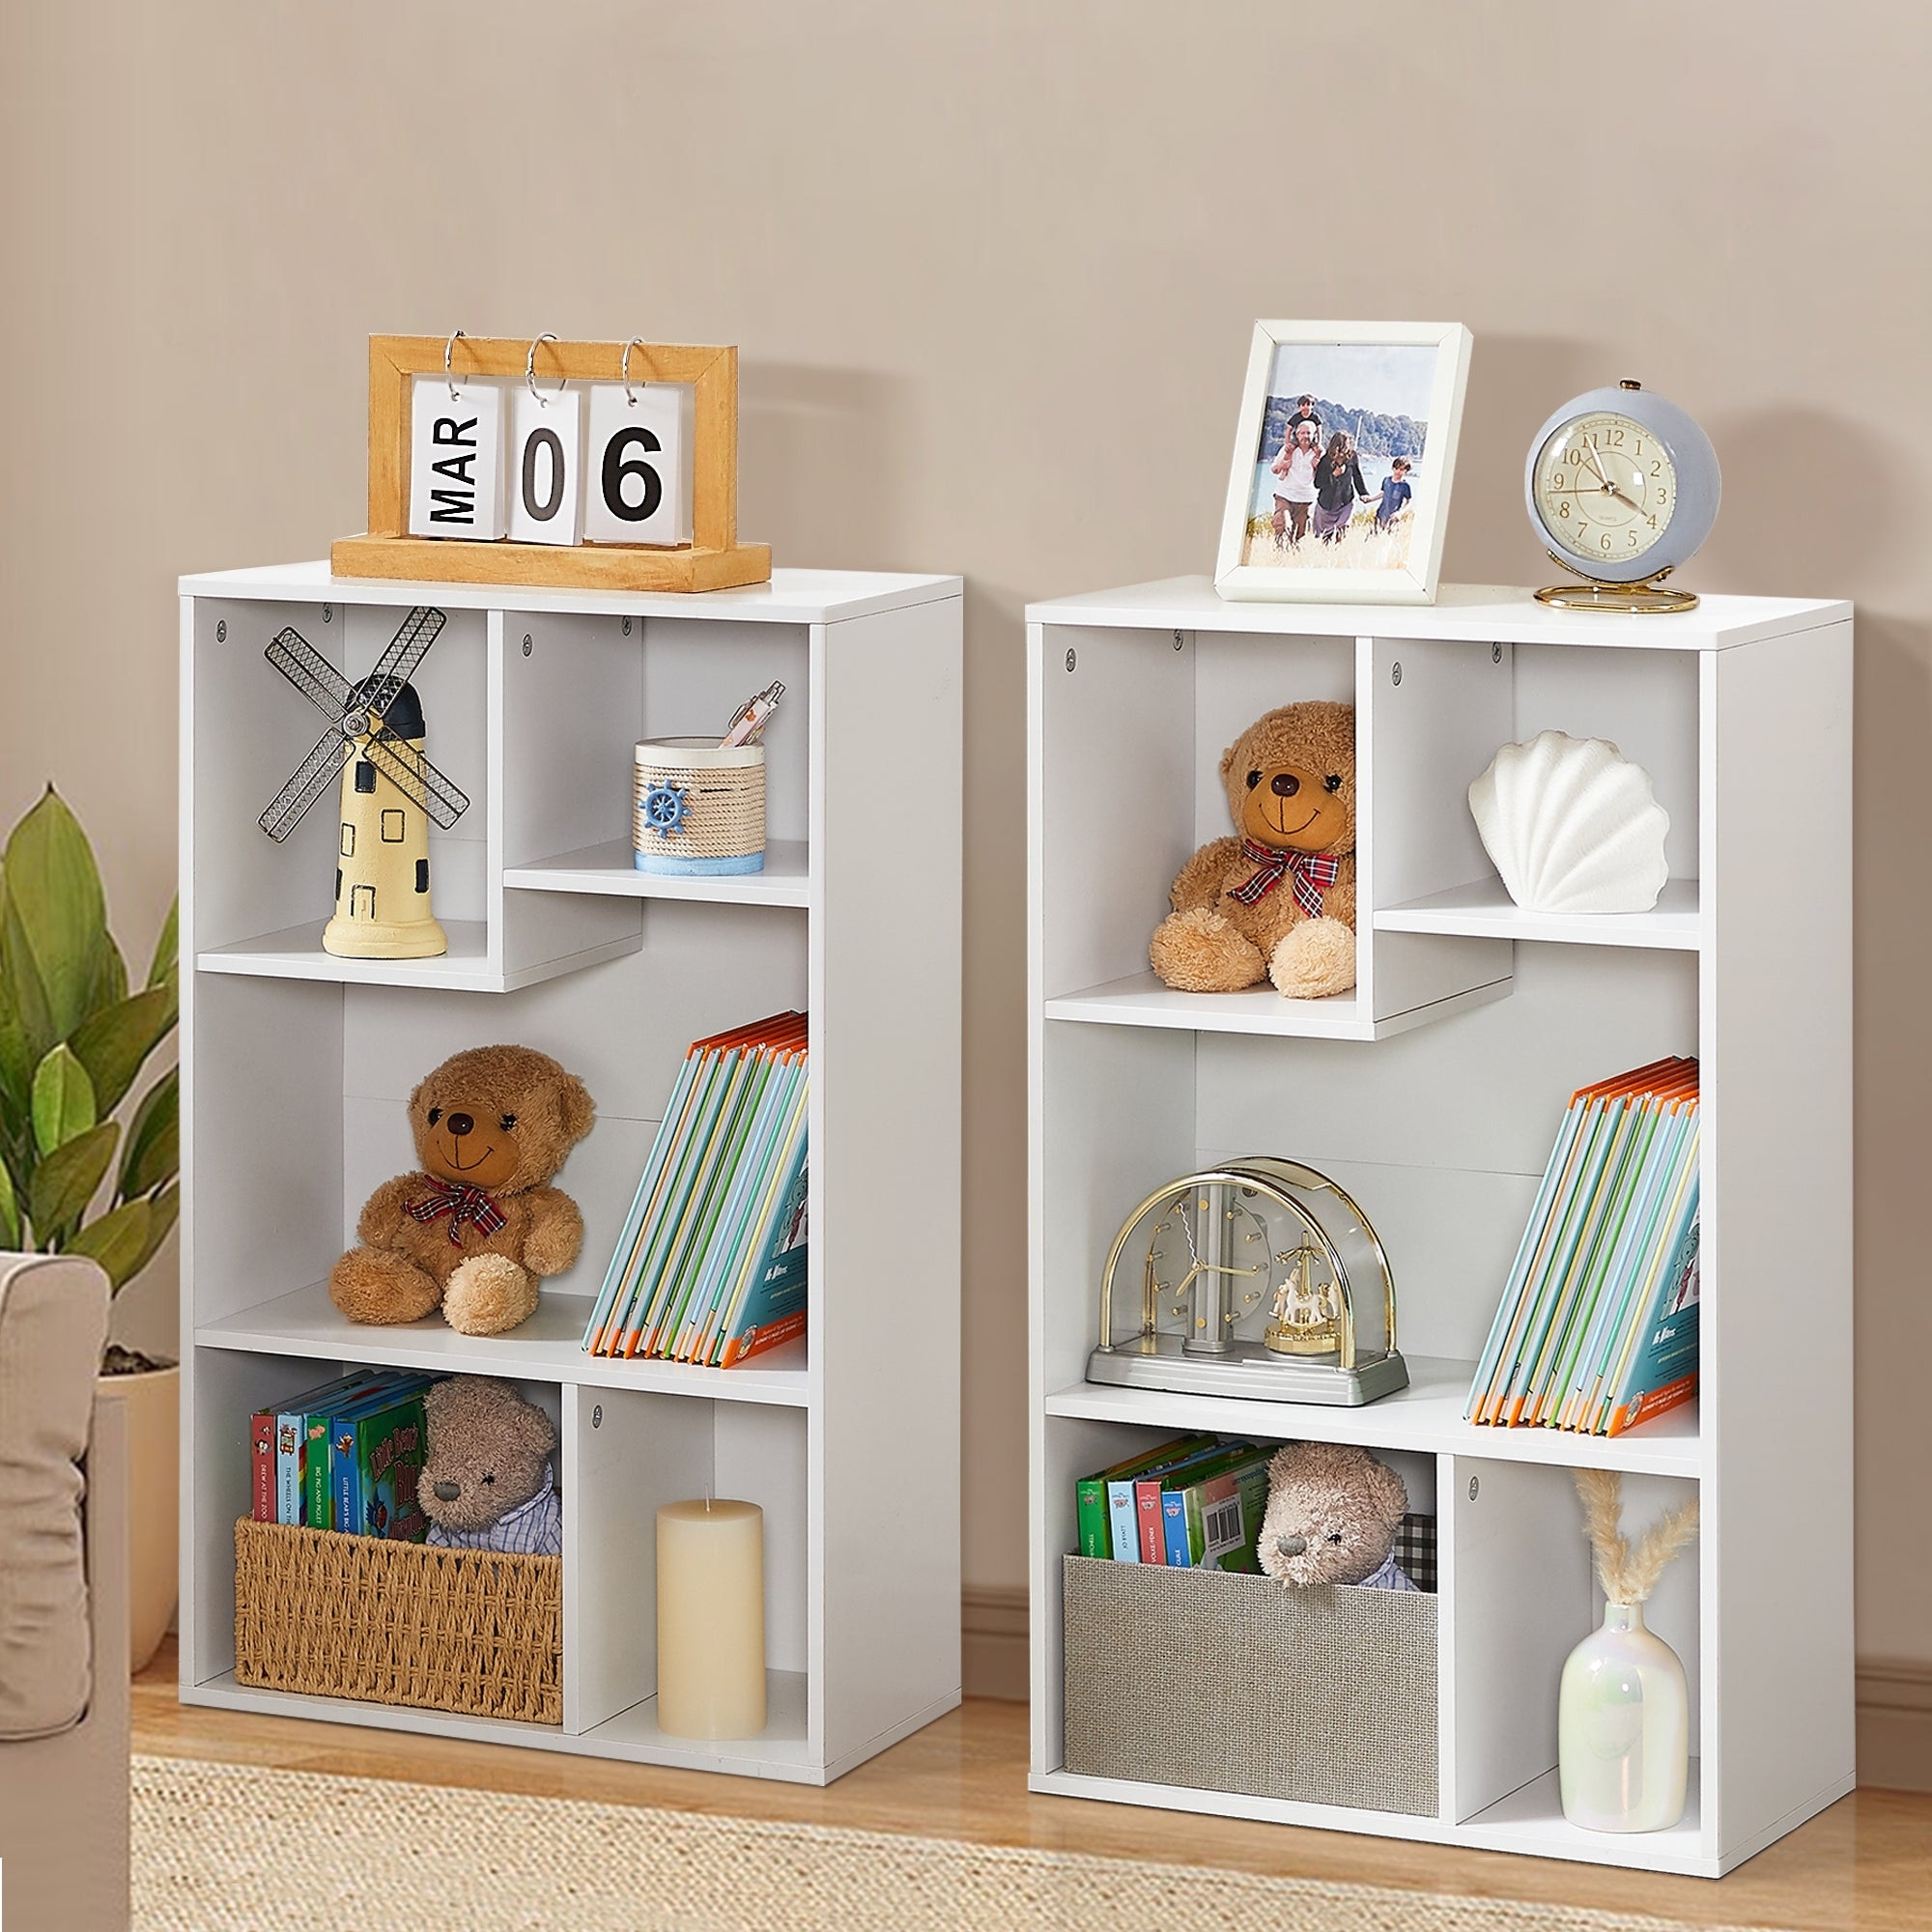 https://ak1.ostkcdn.com/images/products/is/images/direct/d5e2e9f42344d6d3ba47c47e876182f94f05a31f/4-Tier-Bookshelf%2C-Set-of-2-Tall-Bookcase-Shelf-Storage-Organizer%2C-Modern-Book-Shelf-for-Bedroom%2C-Living-Room-and-Home-Office.jpg